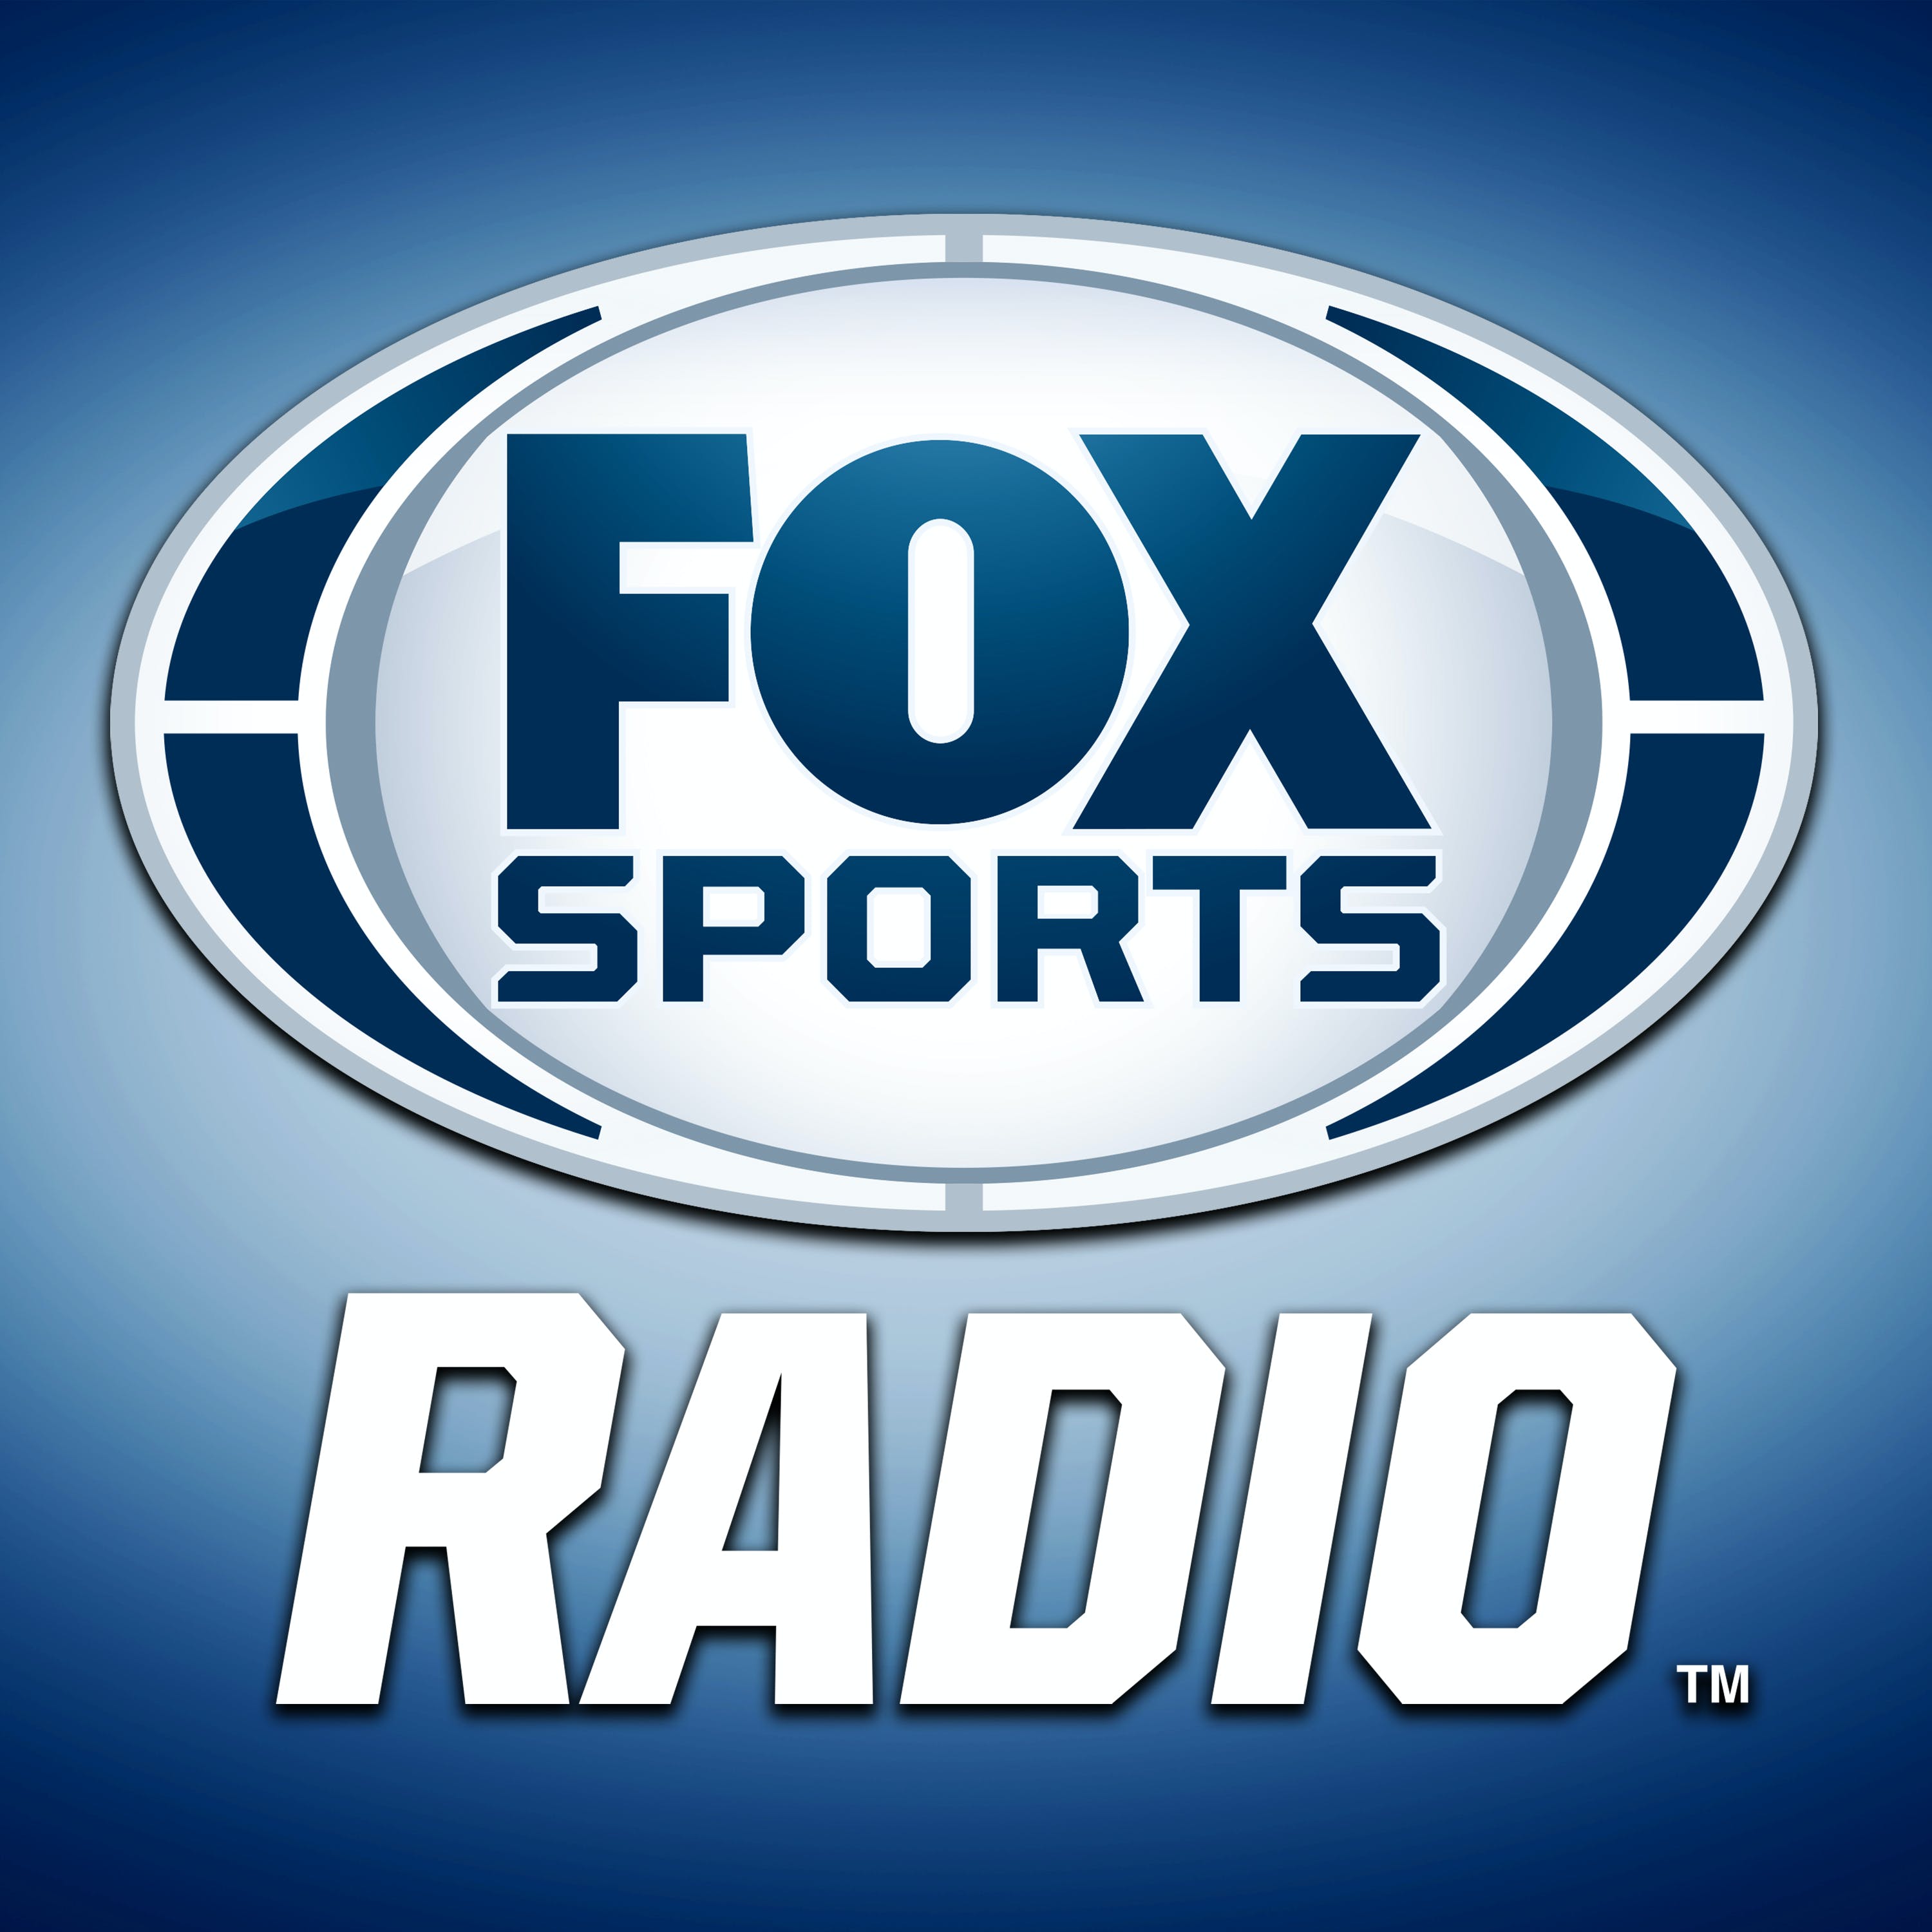 03/13/2021 - Fox Sports Saturday with Arnie Spanier and Aaron Torres